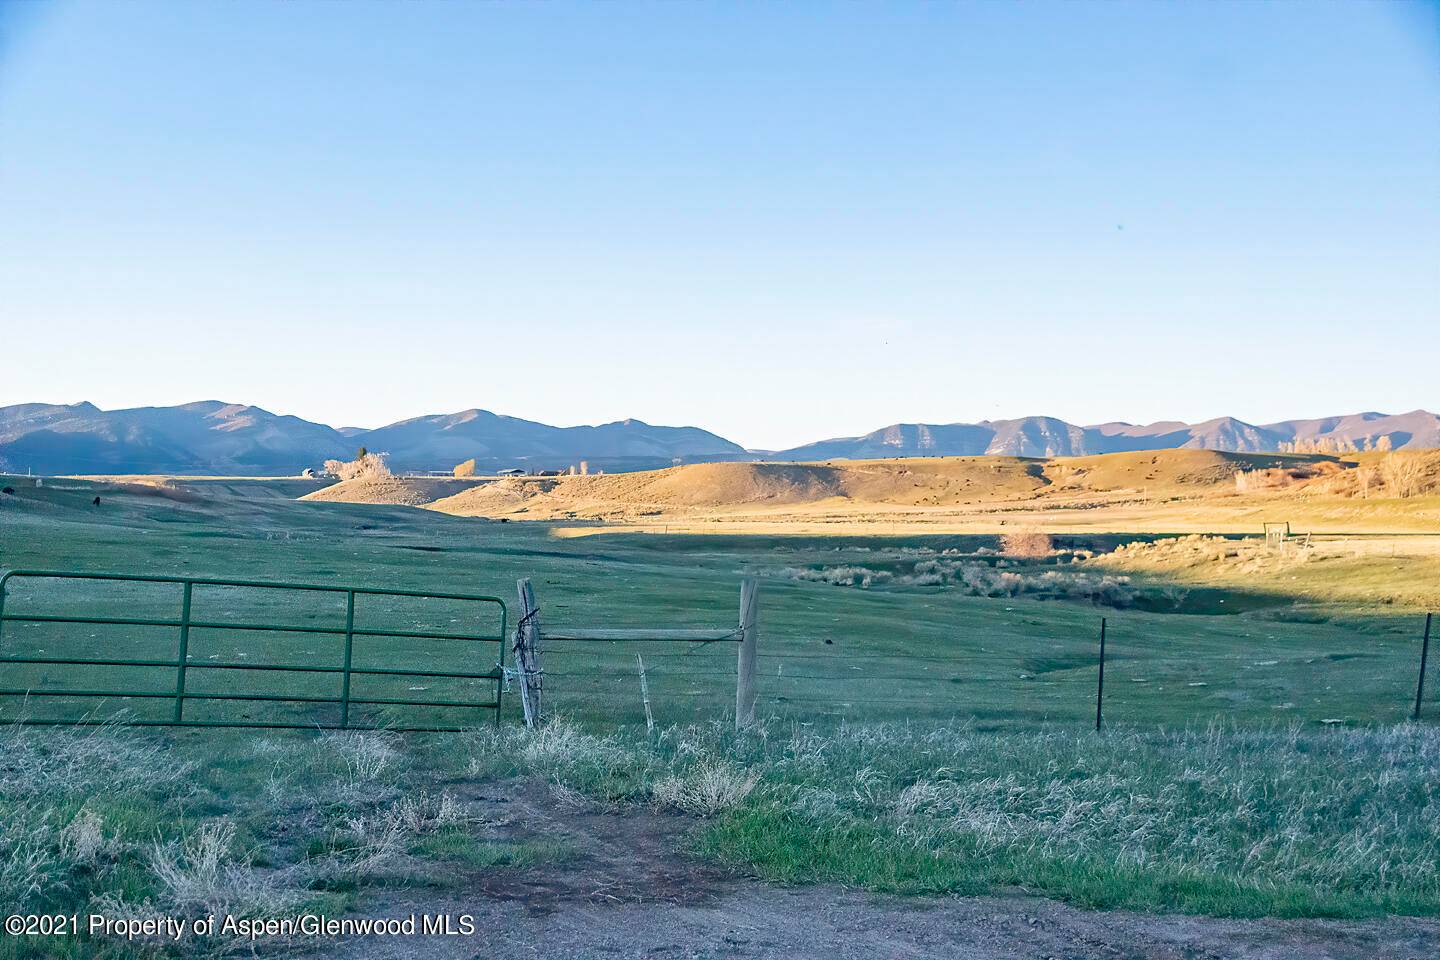 Rarely does a vacant ranch property like this one come up for sale that is a few short minutes drive from the Town of Meeker.